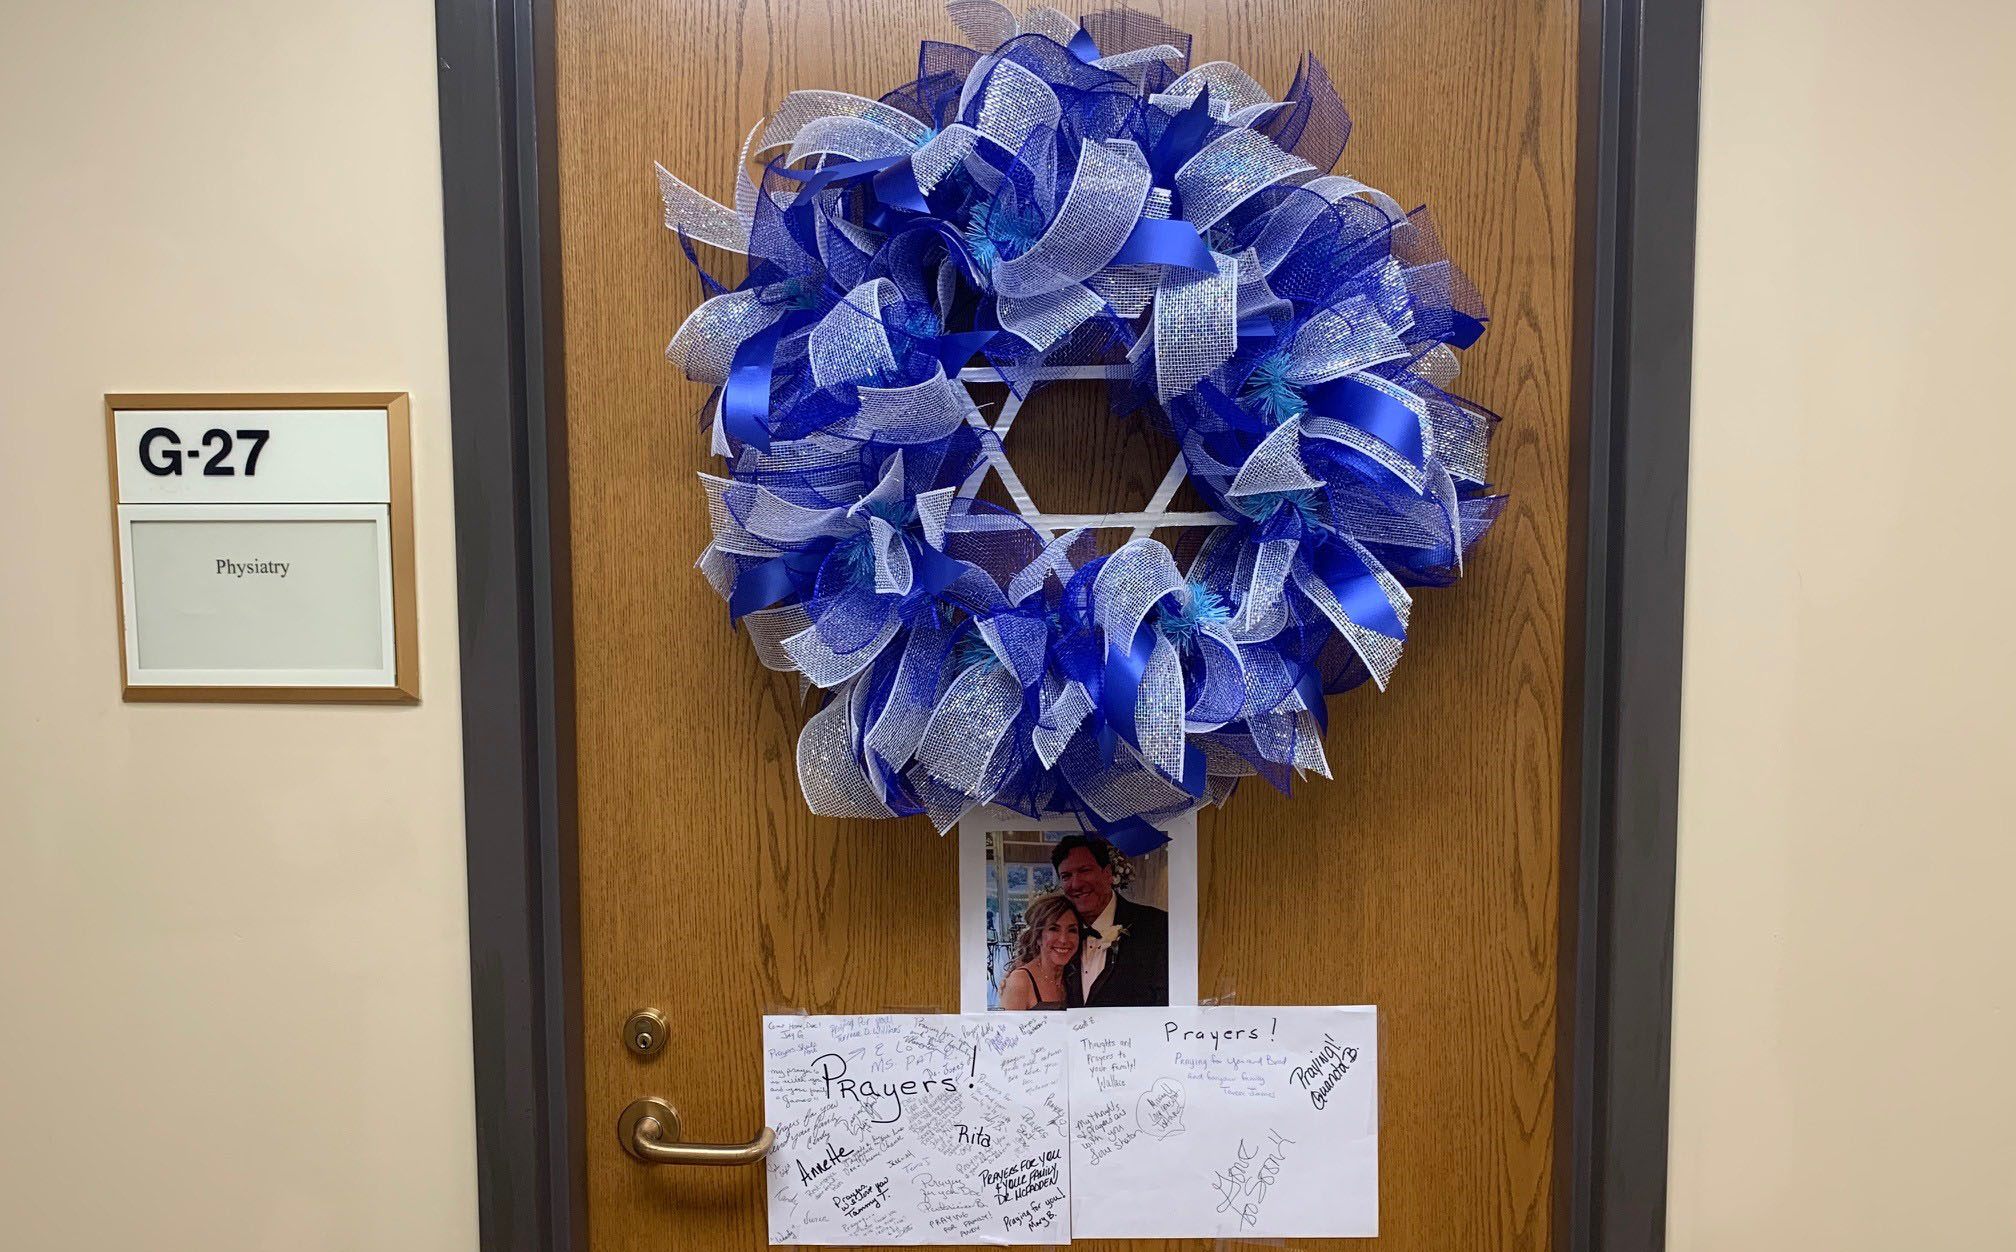 Friends, colleagues, and patients of Dr. Cohen are honoring his memory by posting prayers and condolences on his office door at the Tuscaloosa VA. (Photo by April Jones)